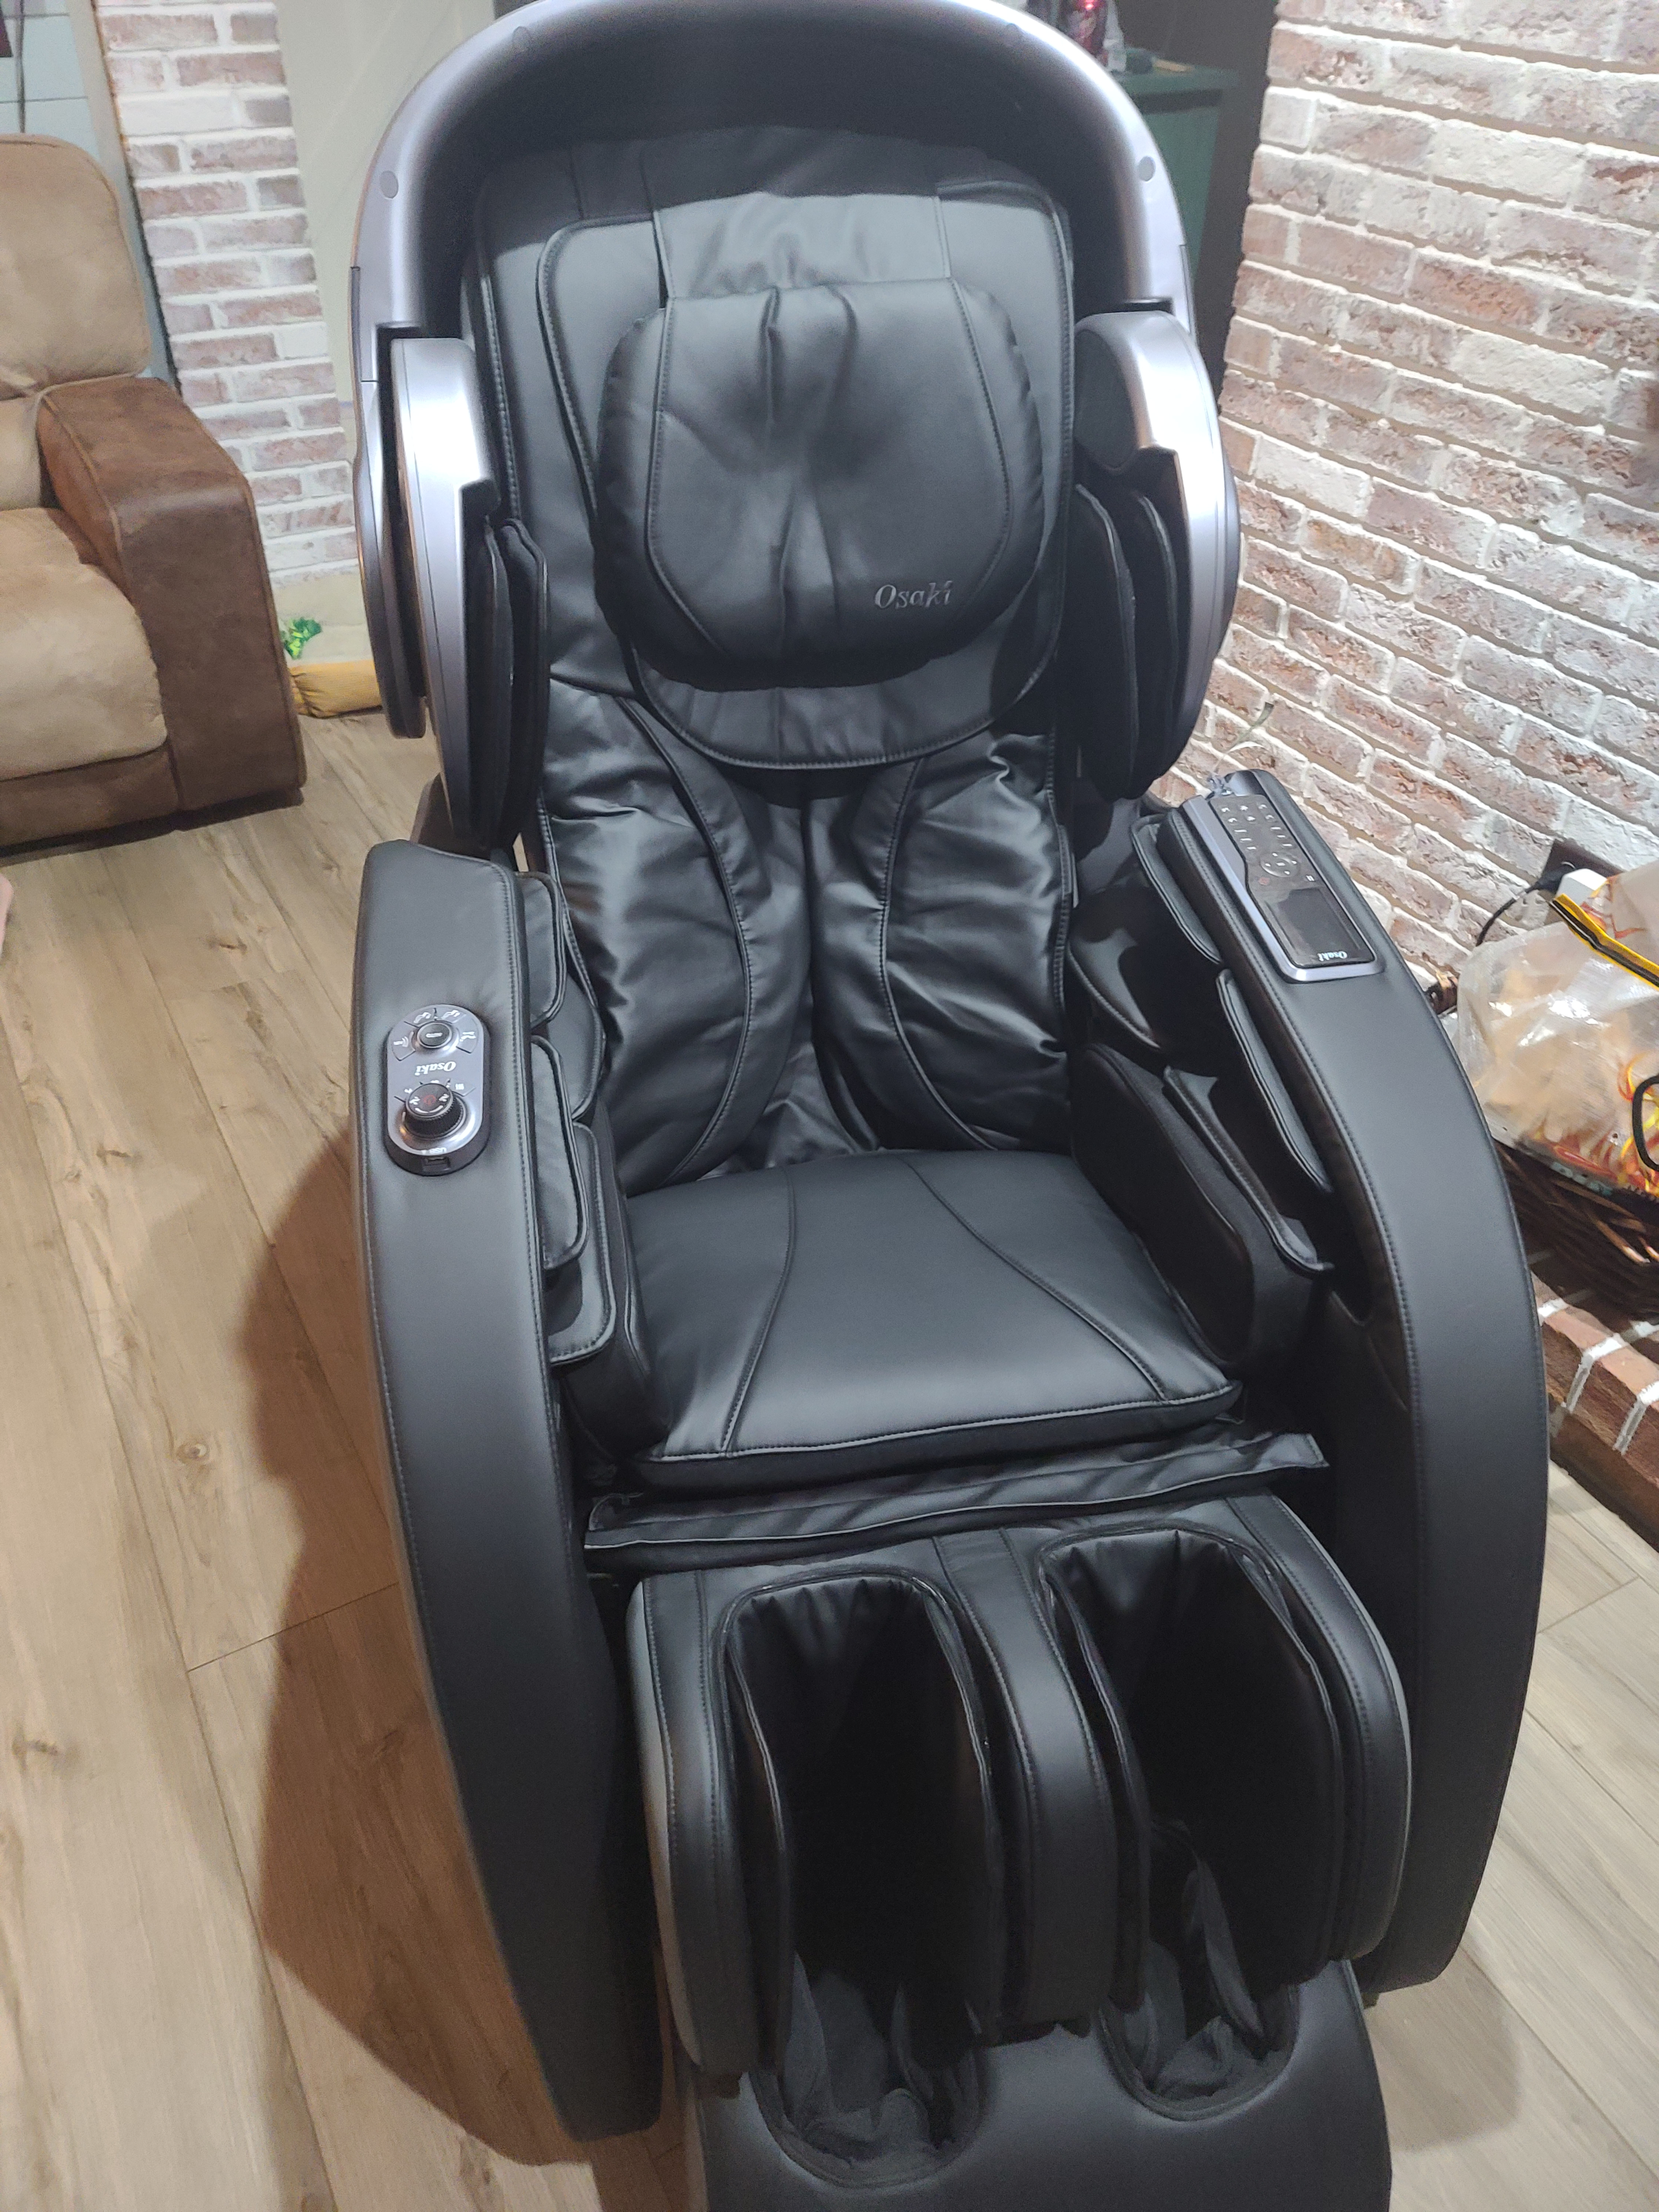 Massage Chair Planet 5 star review on 17th January 2021